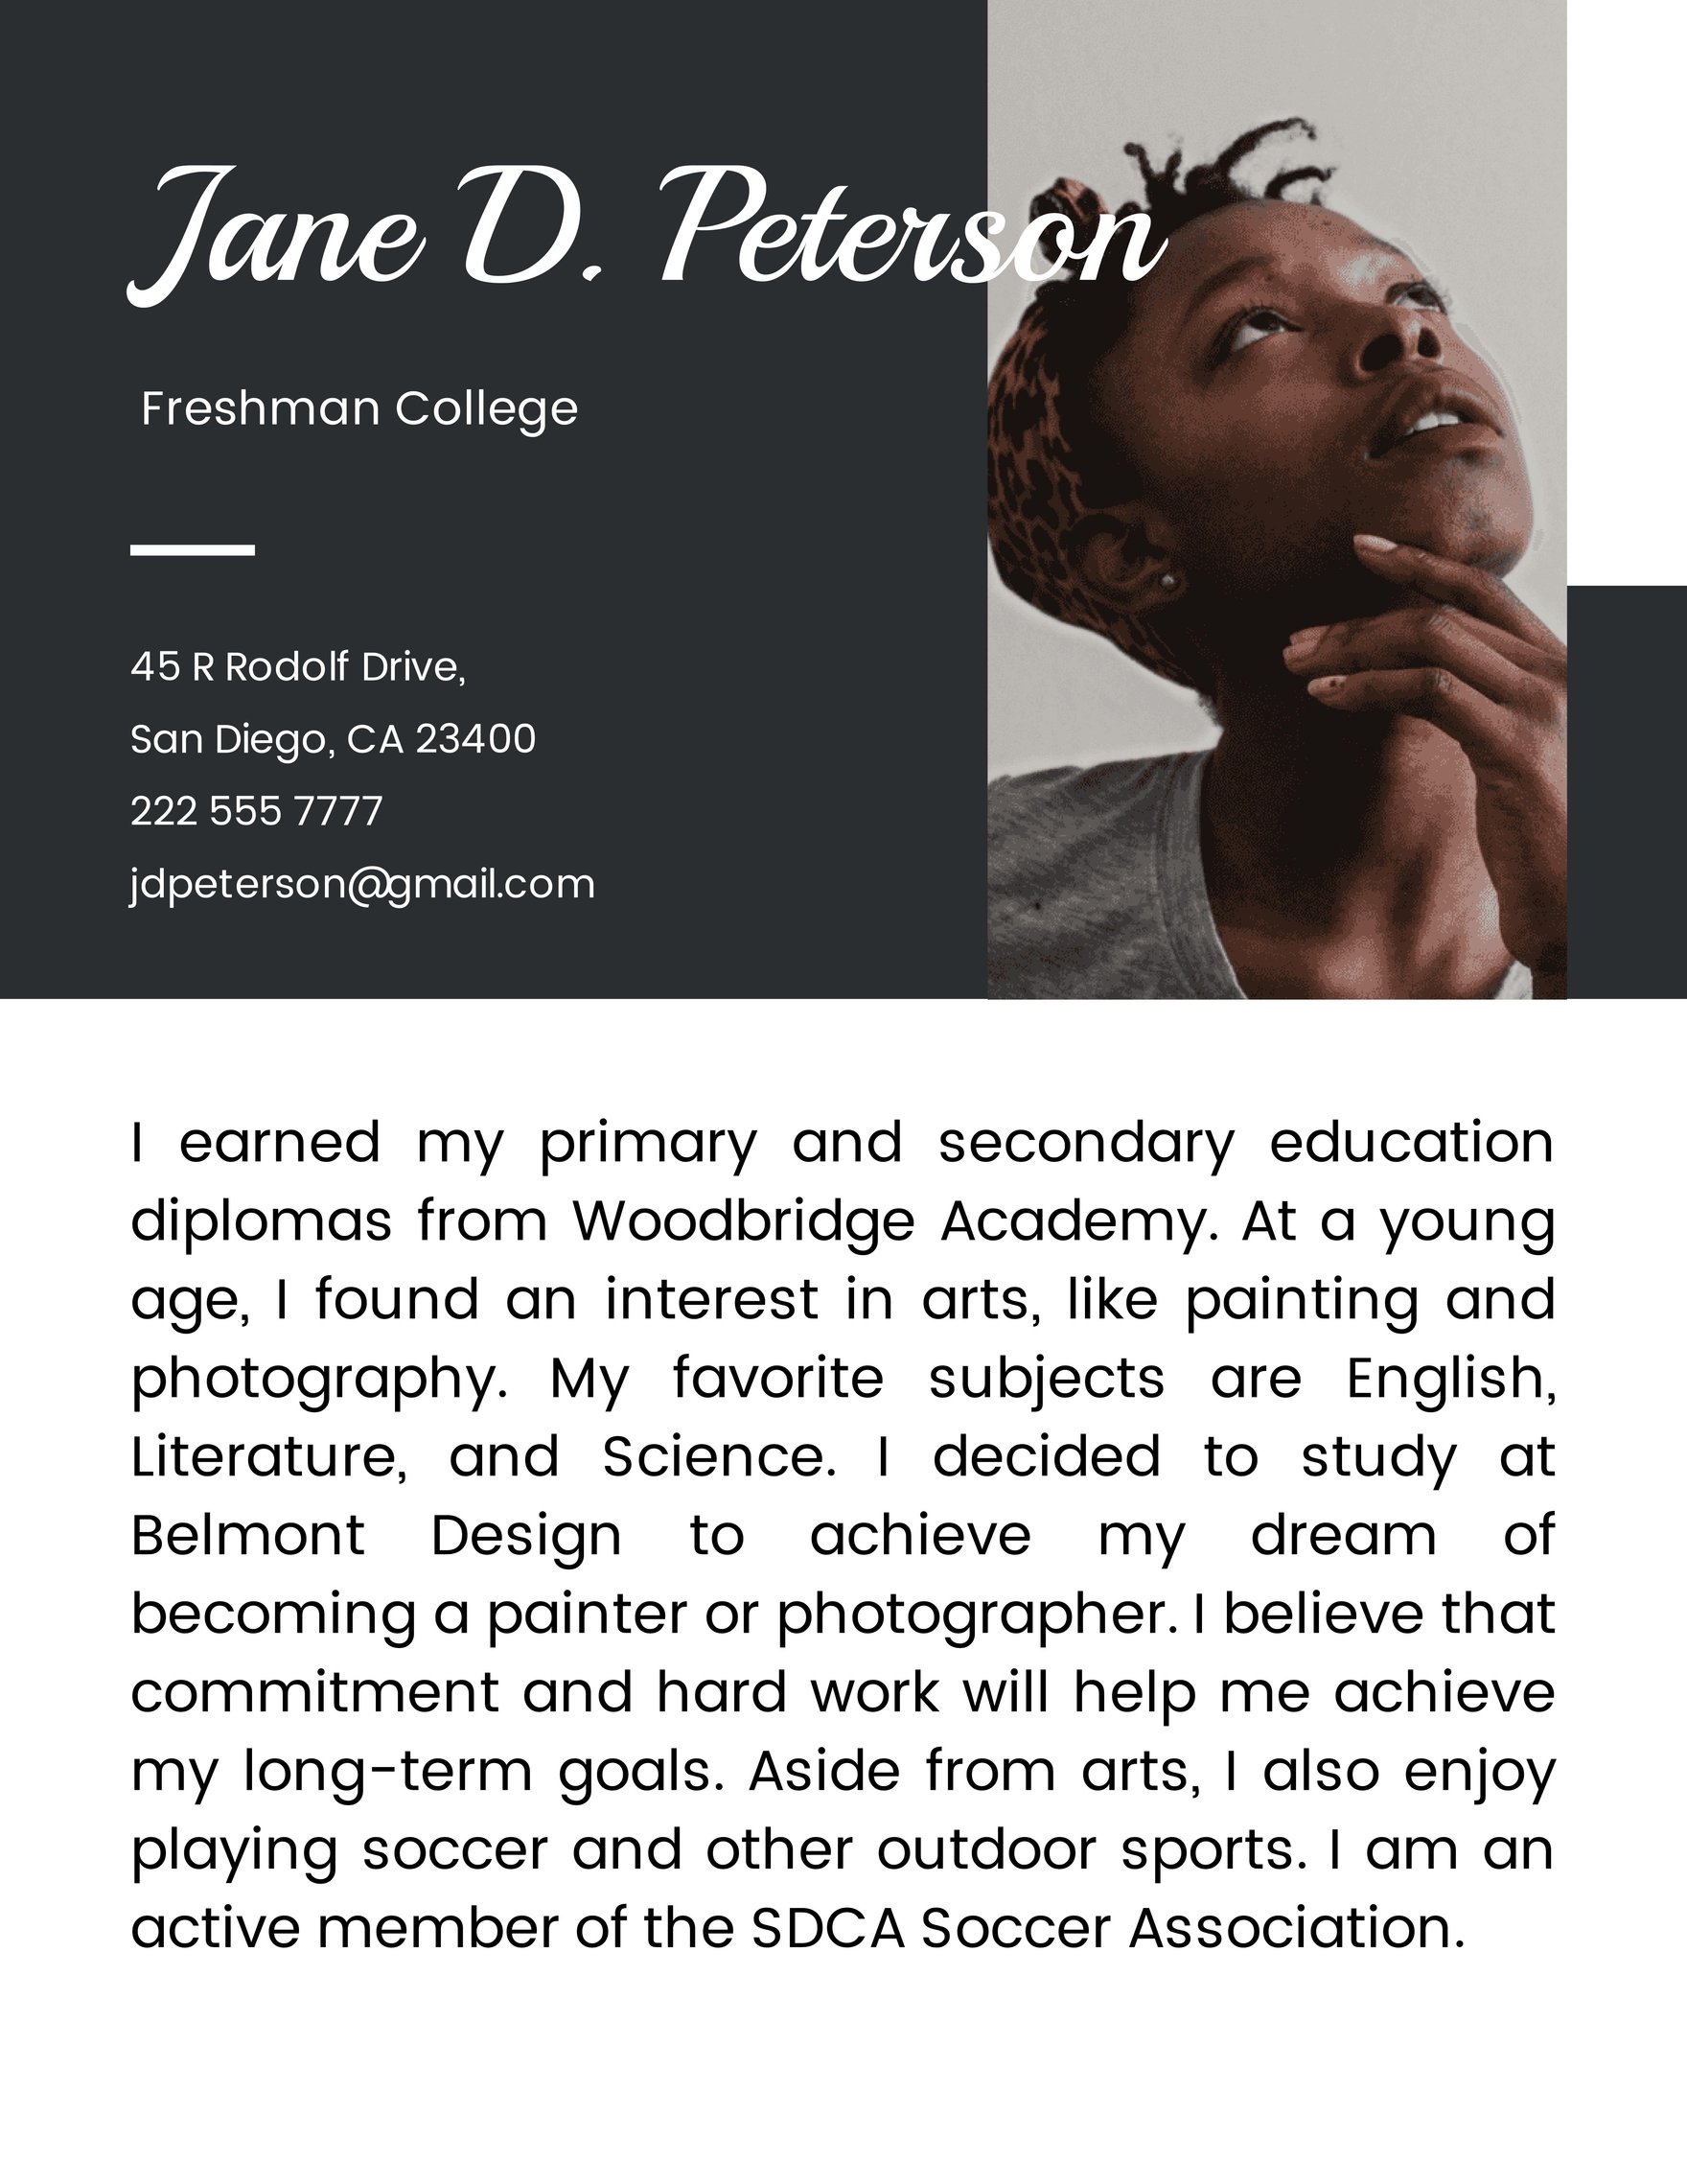 student-self-introduction-template-download-in-jpg-template